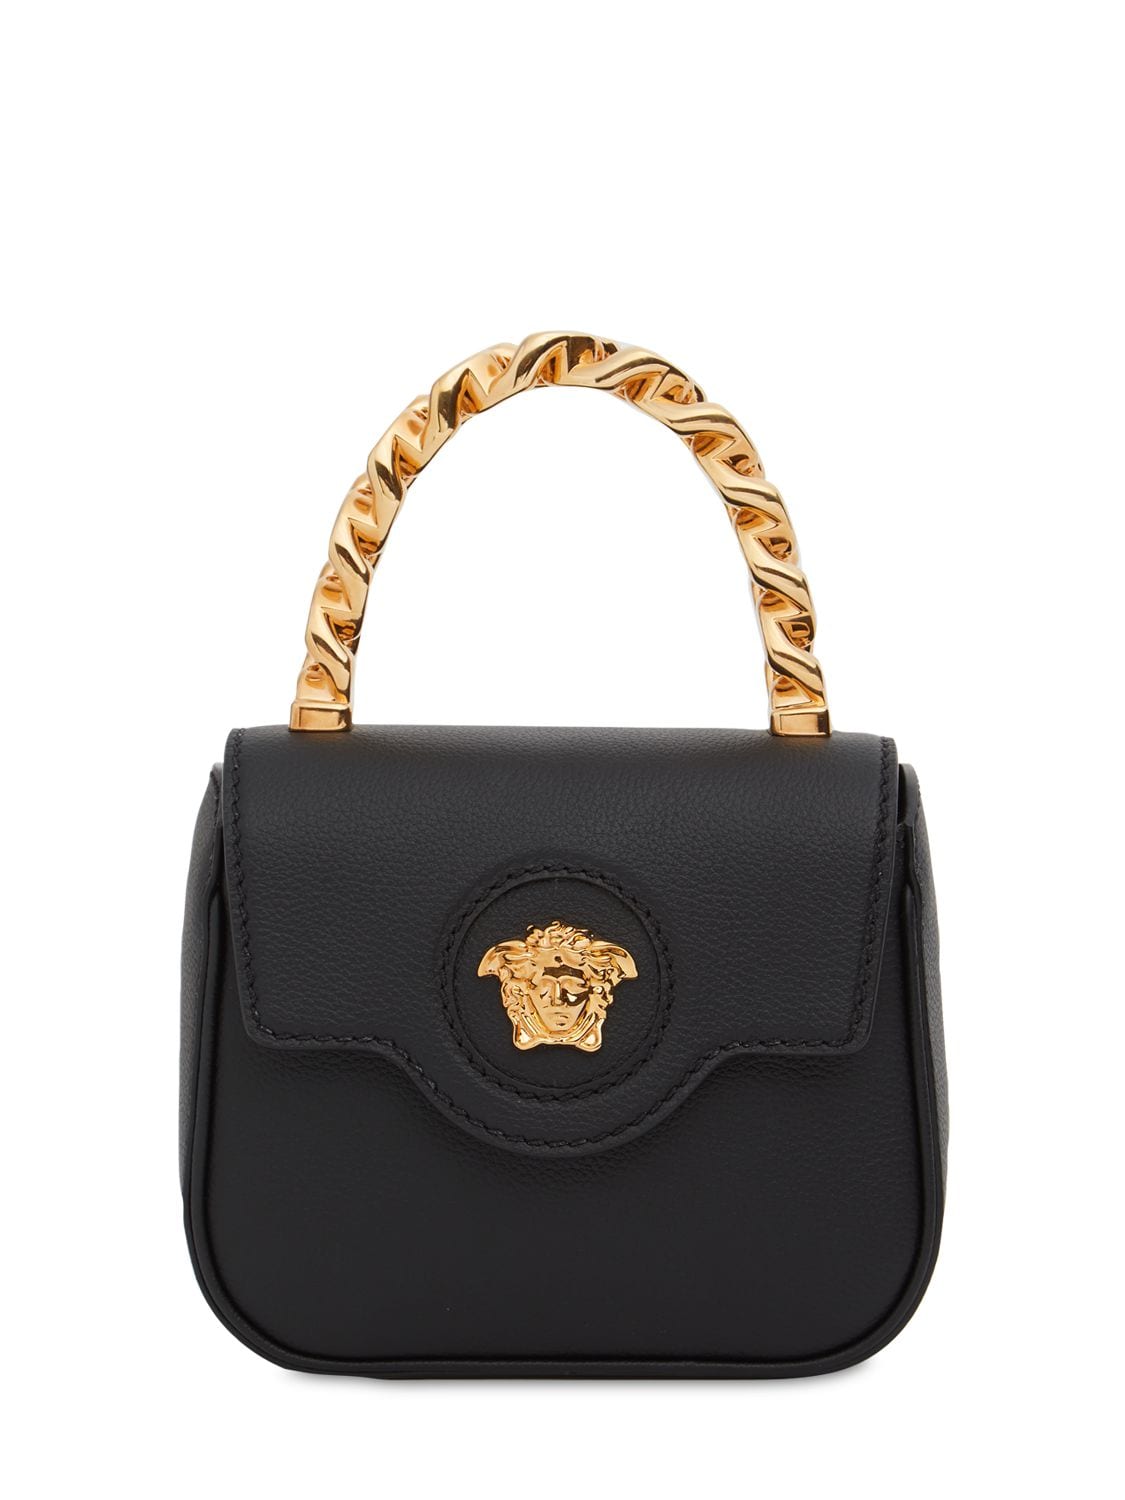 Image of Medusa Grained Leather Top Handle Bag